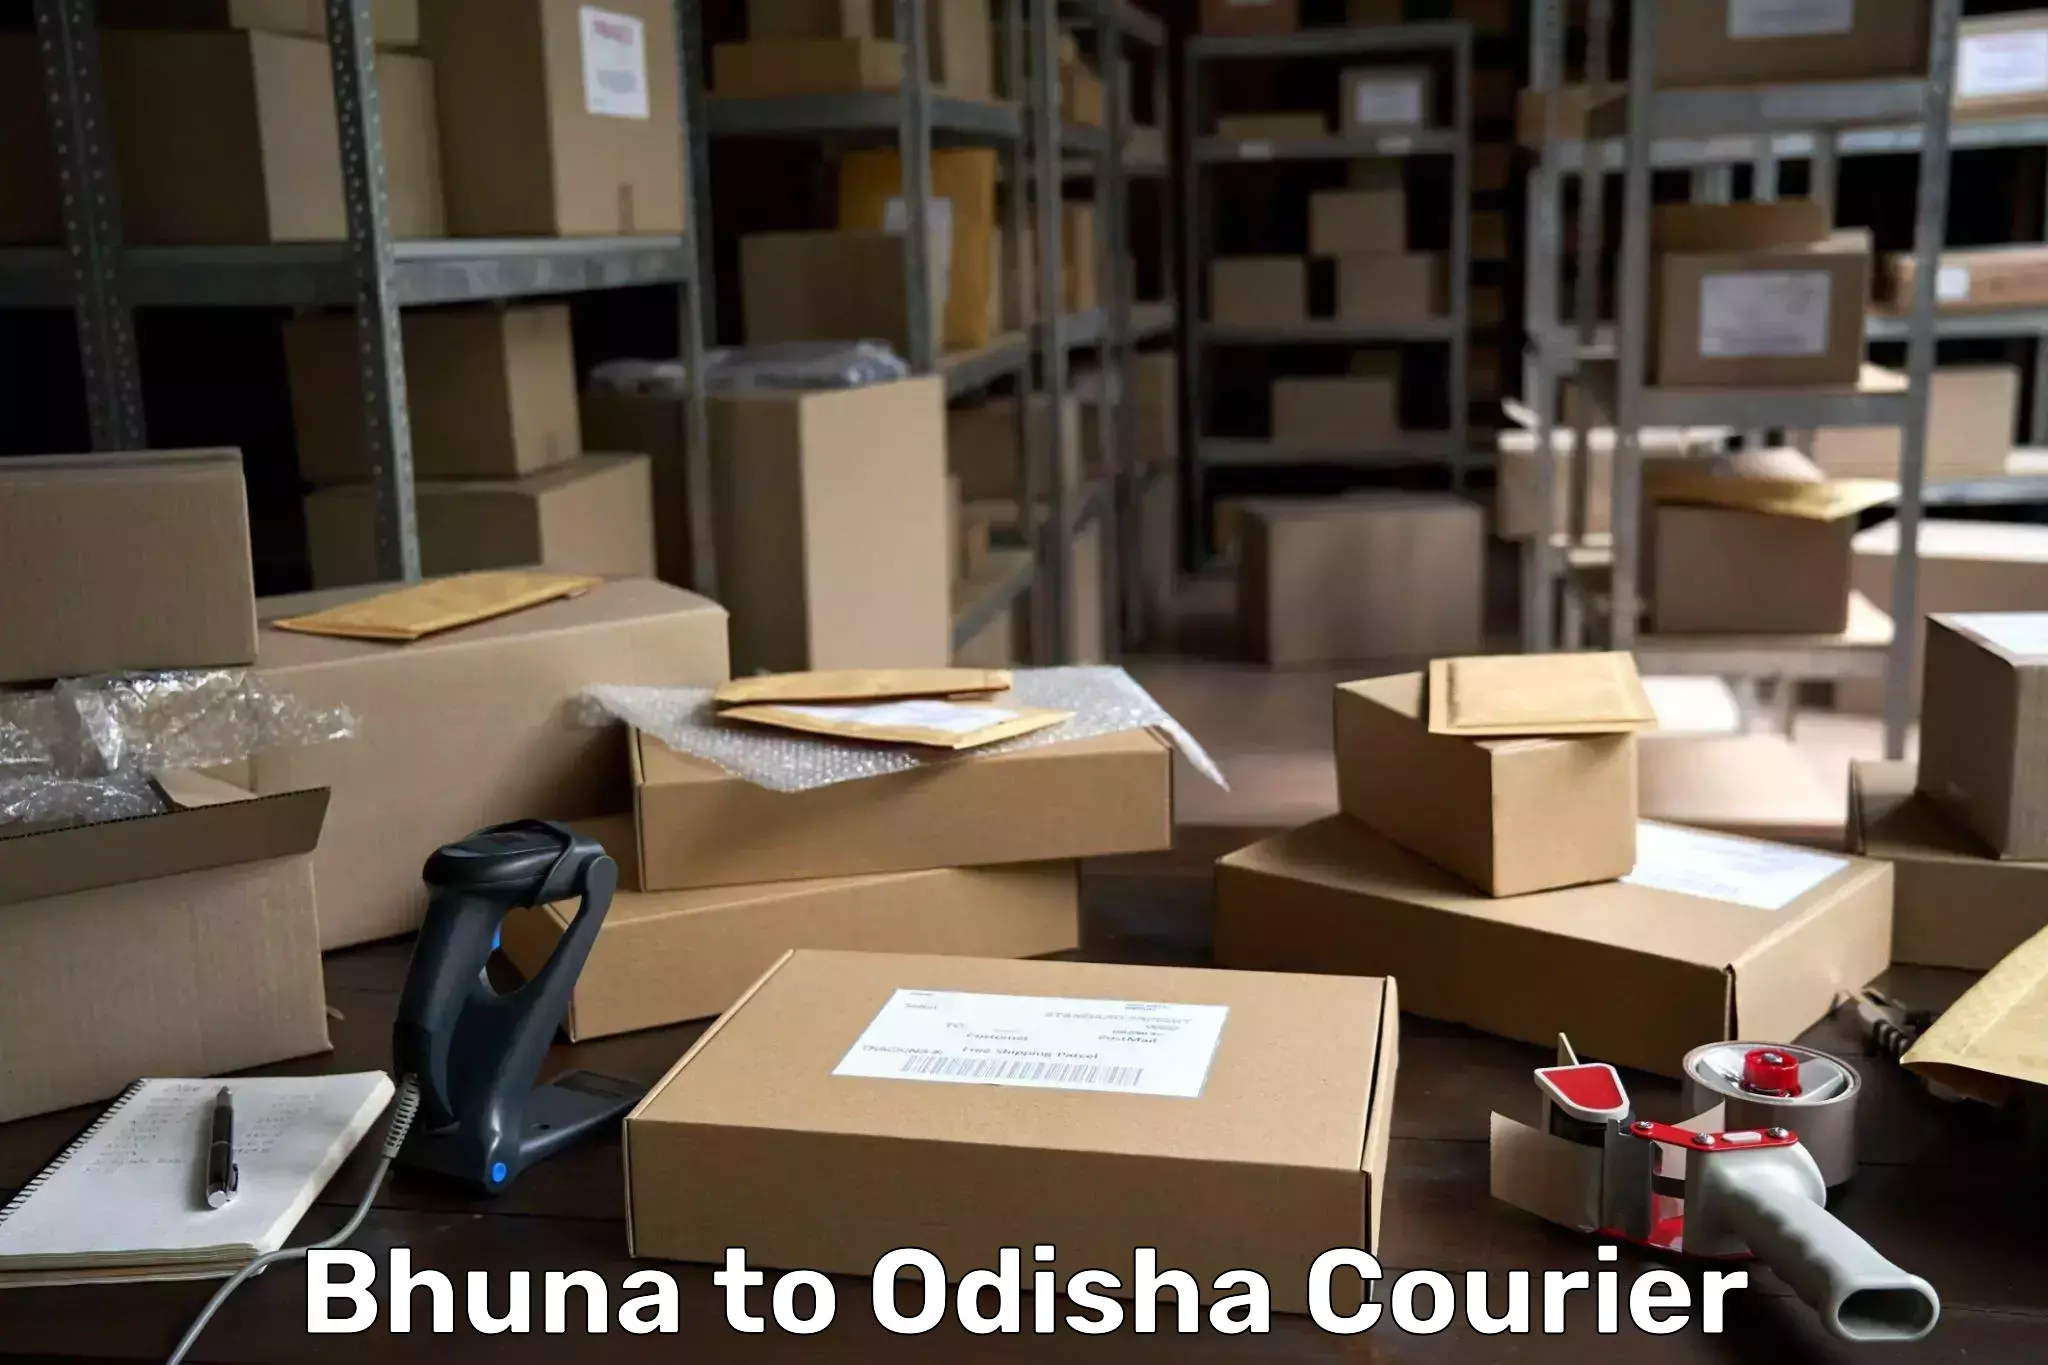 Express delivery capabilities Bhuna to Gajapati